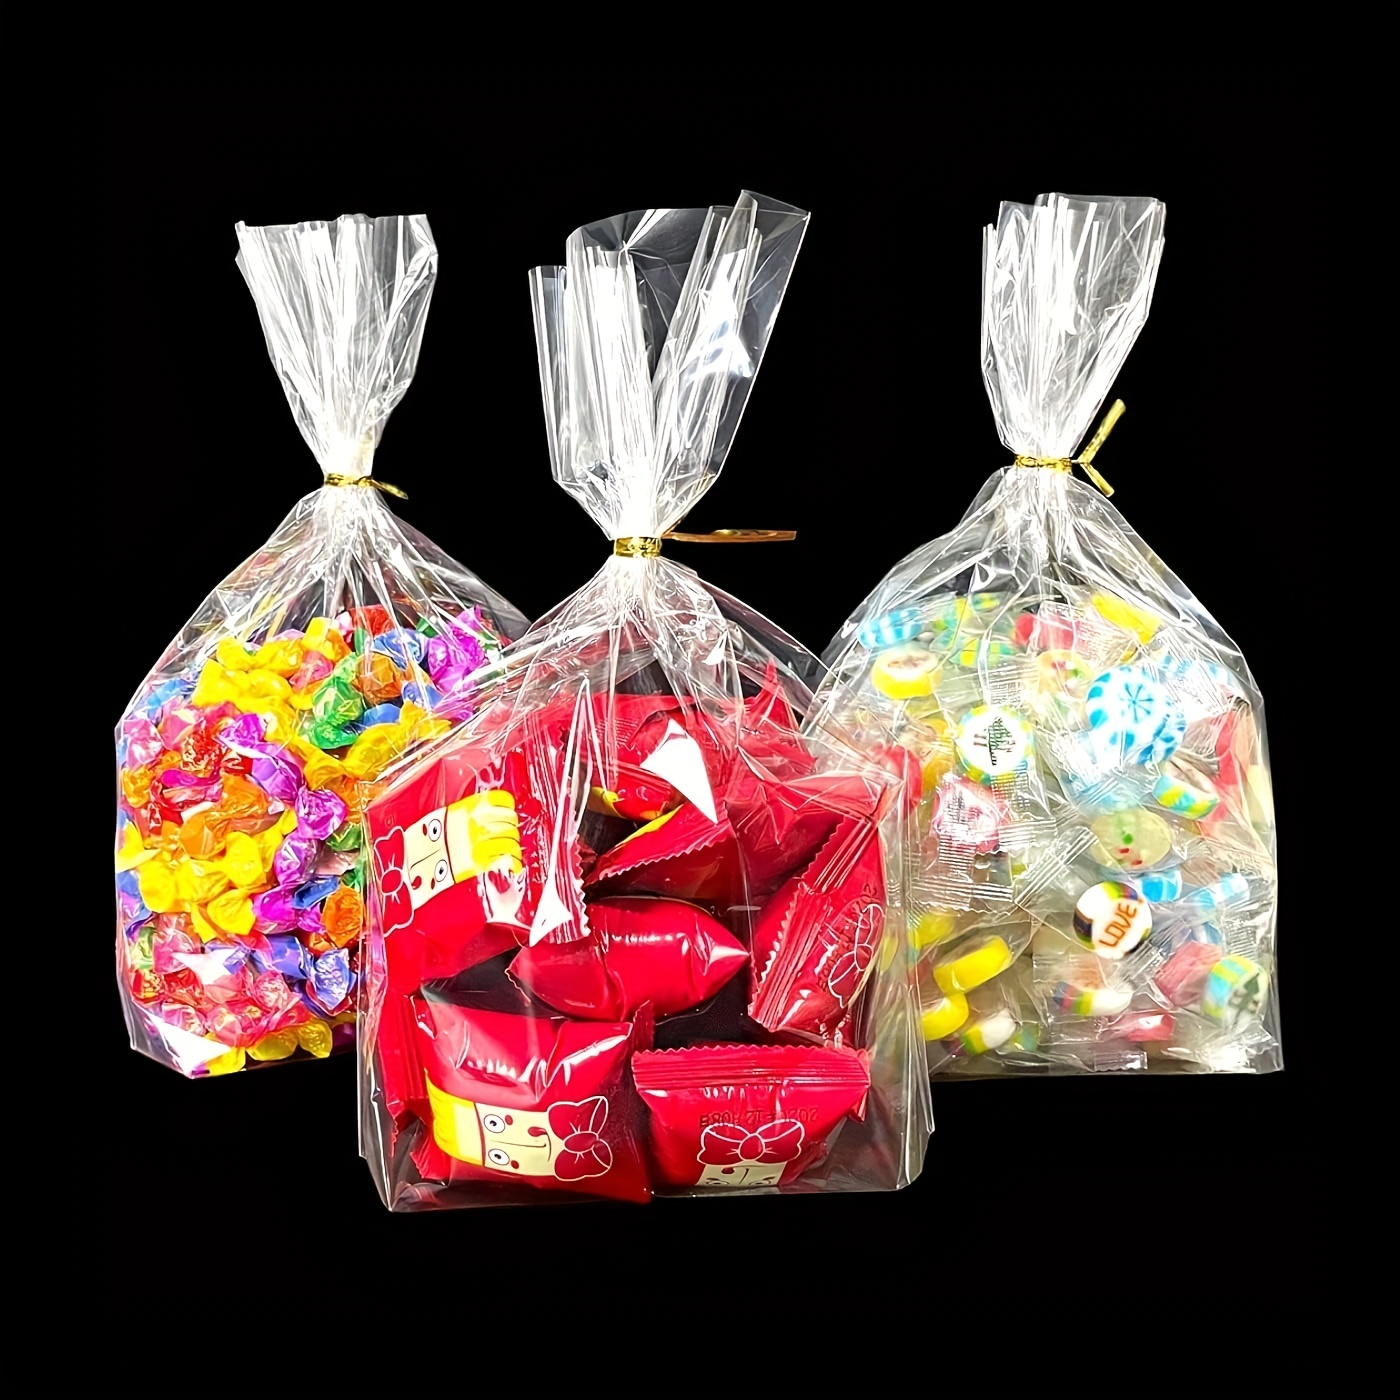 Cellophane Bags For Baskets Cellophane Gift Bags For Wine Bottles, Small  Baskets, Mugs And Gifts Clear Cellophane Bags Basket Bags Cello Gift Bags